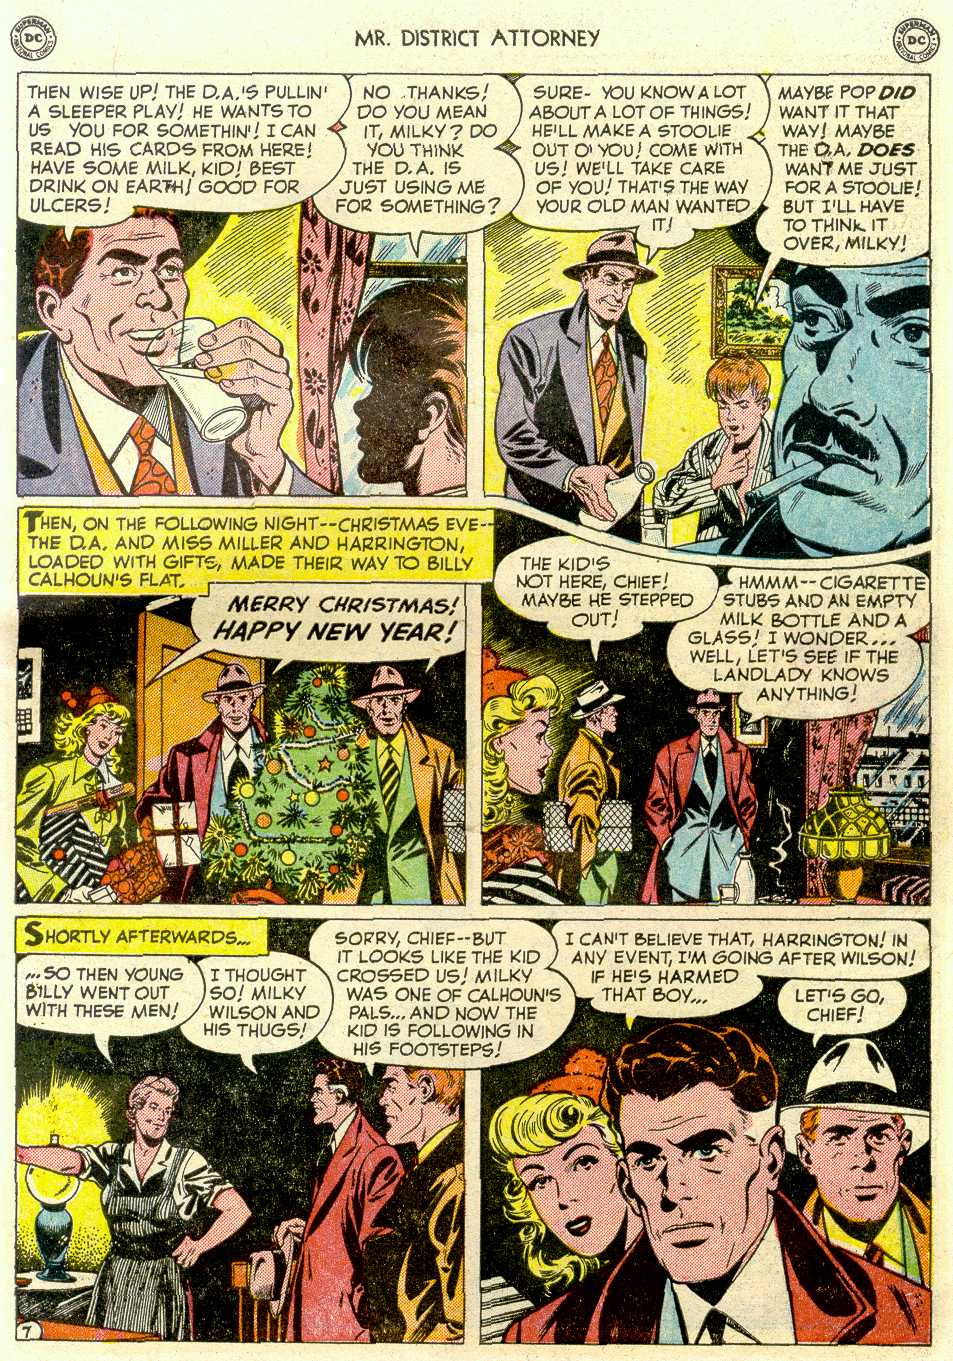 Read online Mr. District Attorney comic -  Issue #19 - 45